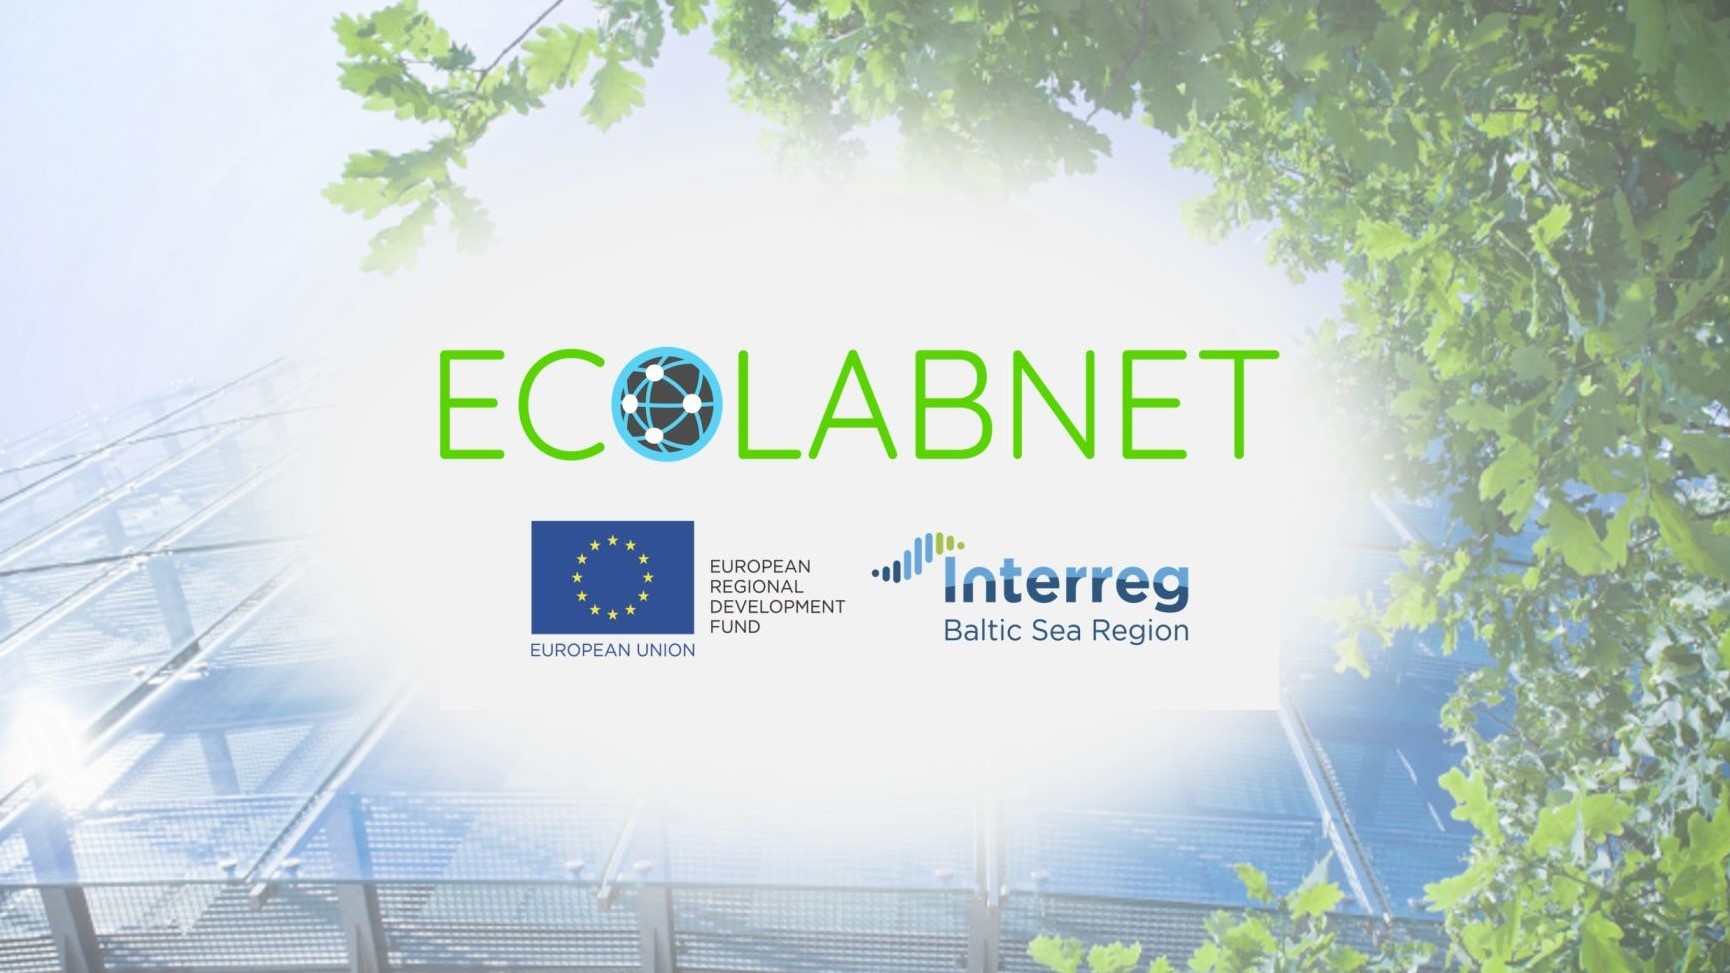 ECOLABNET network supports SMEs in developing sustainable eco-innovations